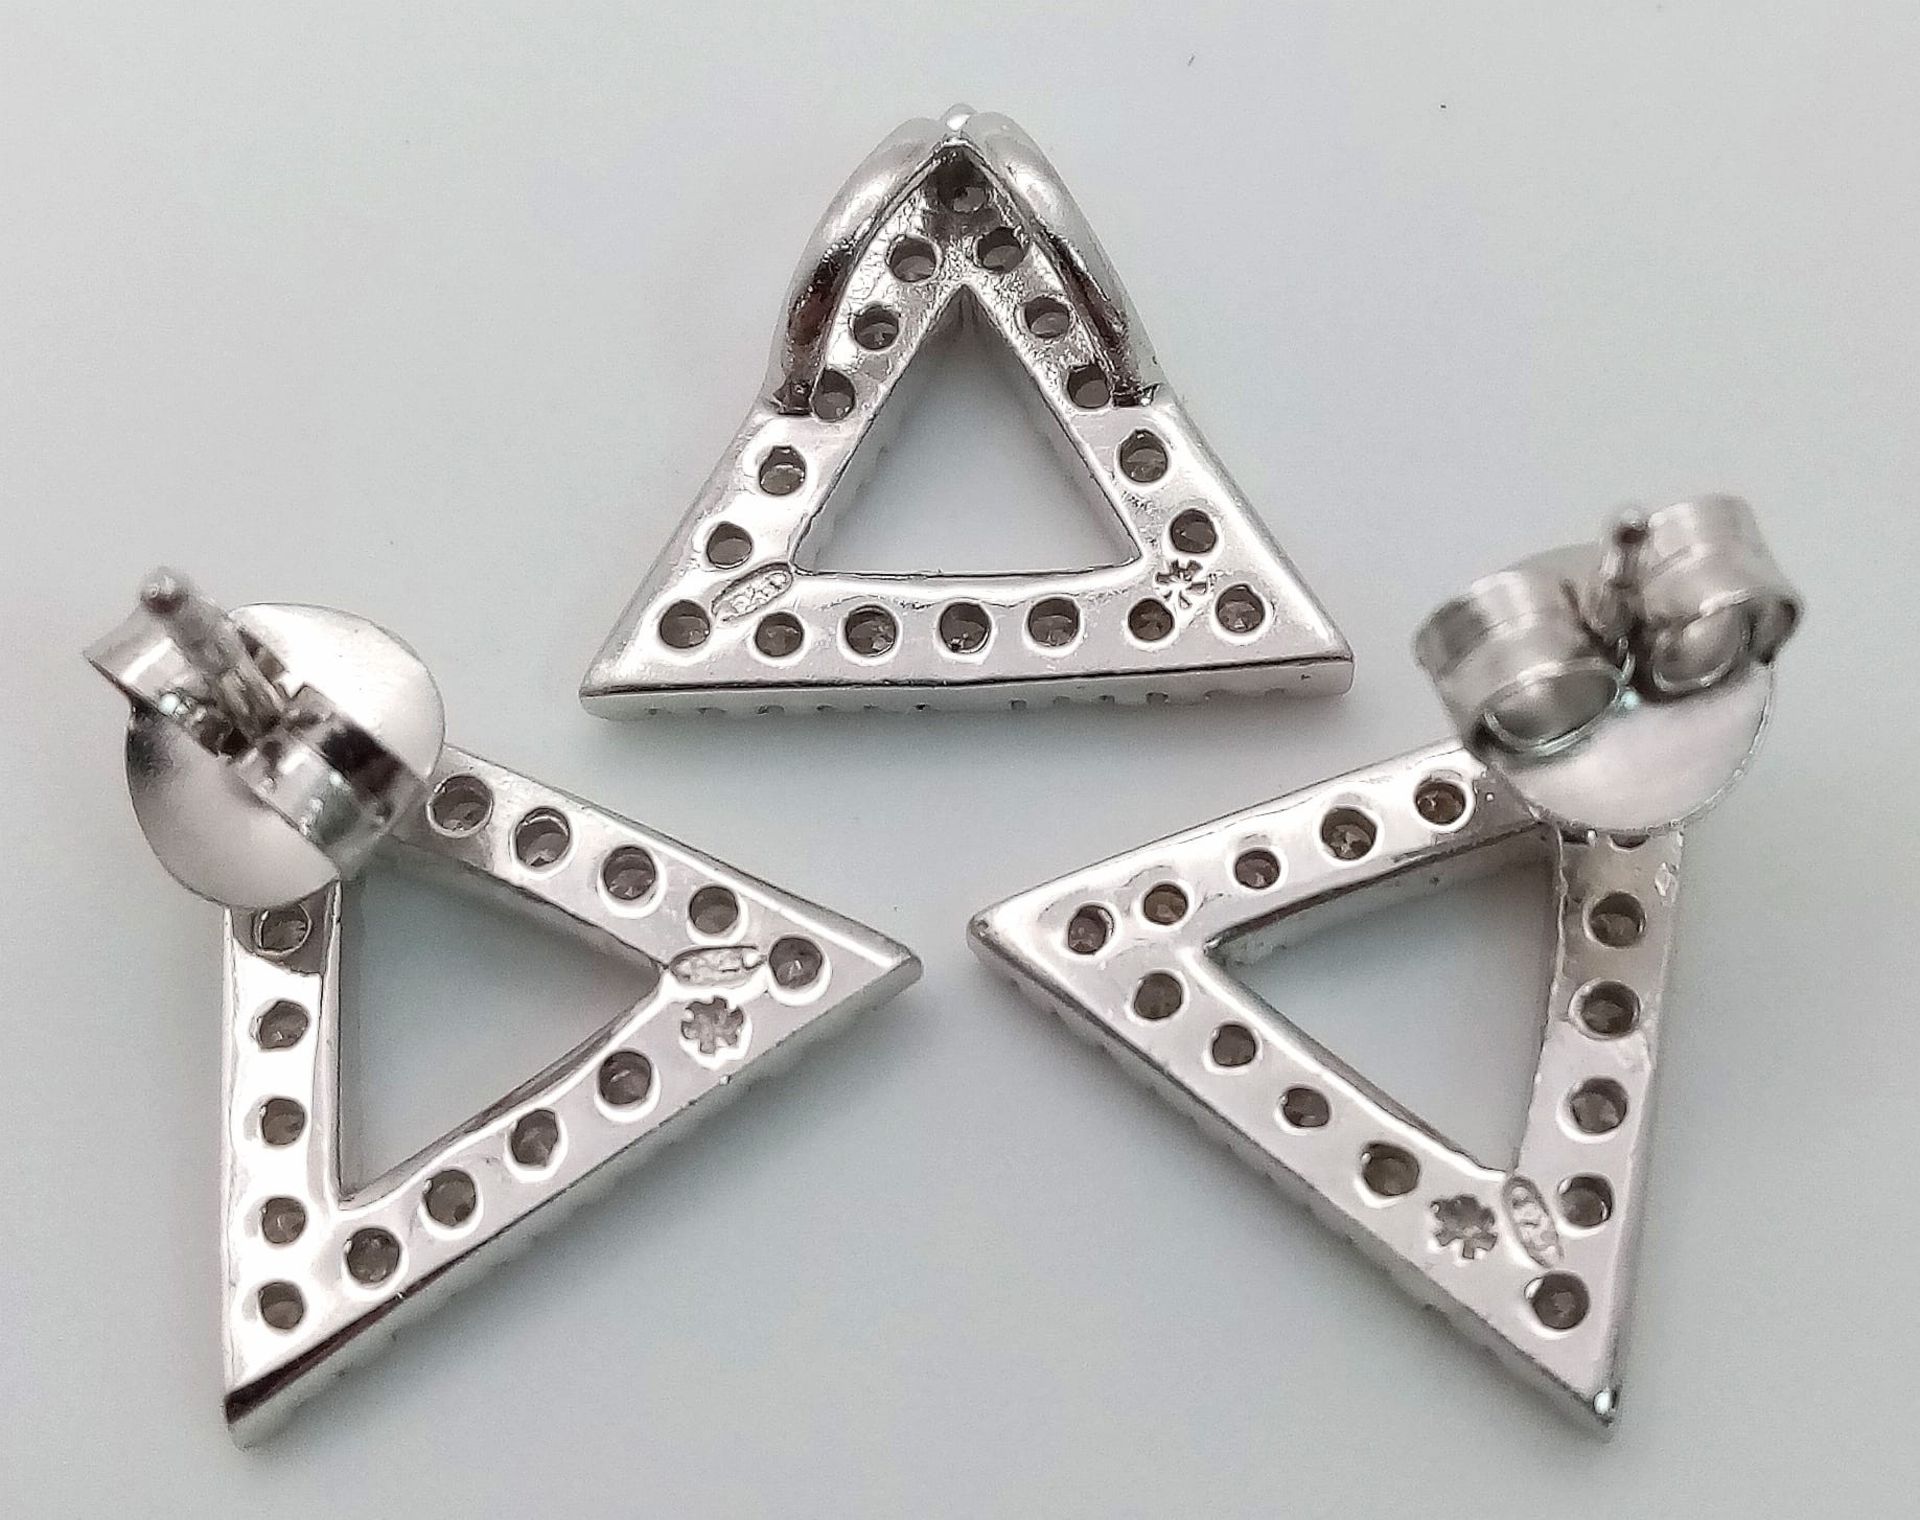 A MATCHING SET OF STERLING SILVER STONE SET TRINGULAR STUD EARRINGS AND PENDANT, WEIGHT 4.1G - Image 2 of 6